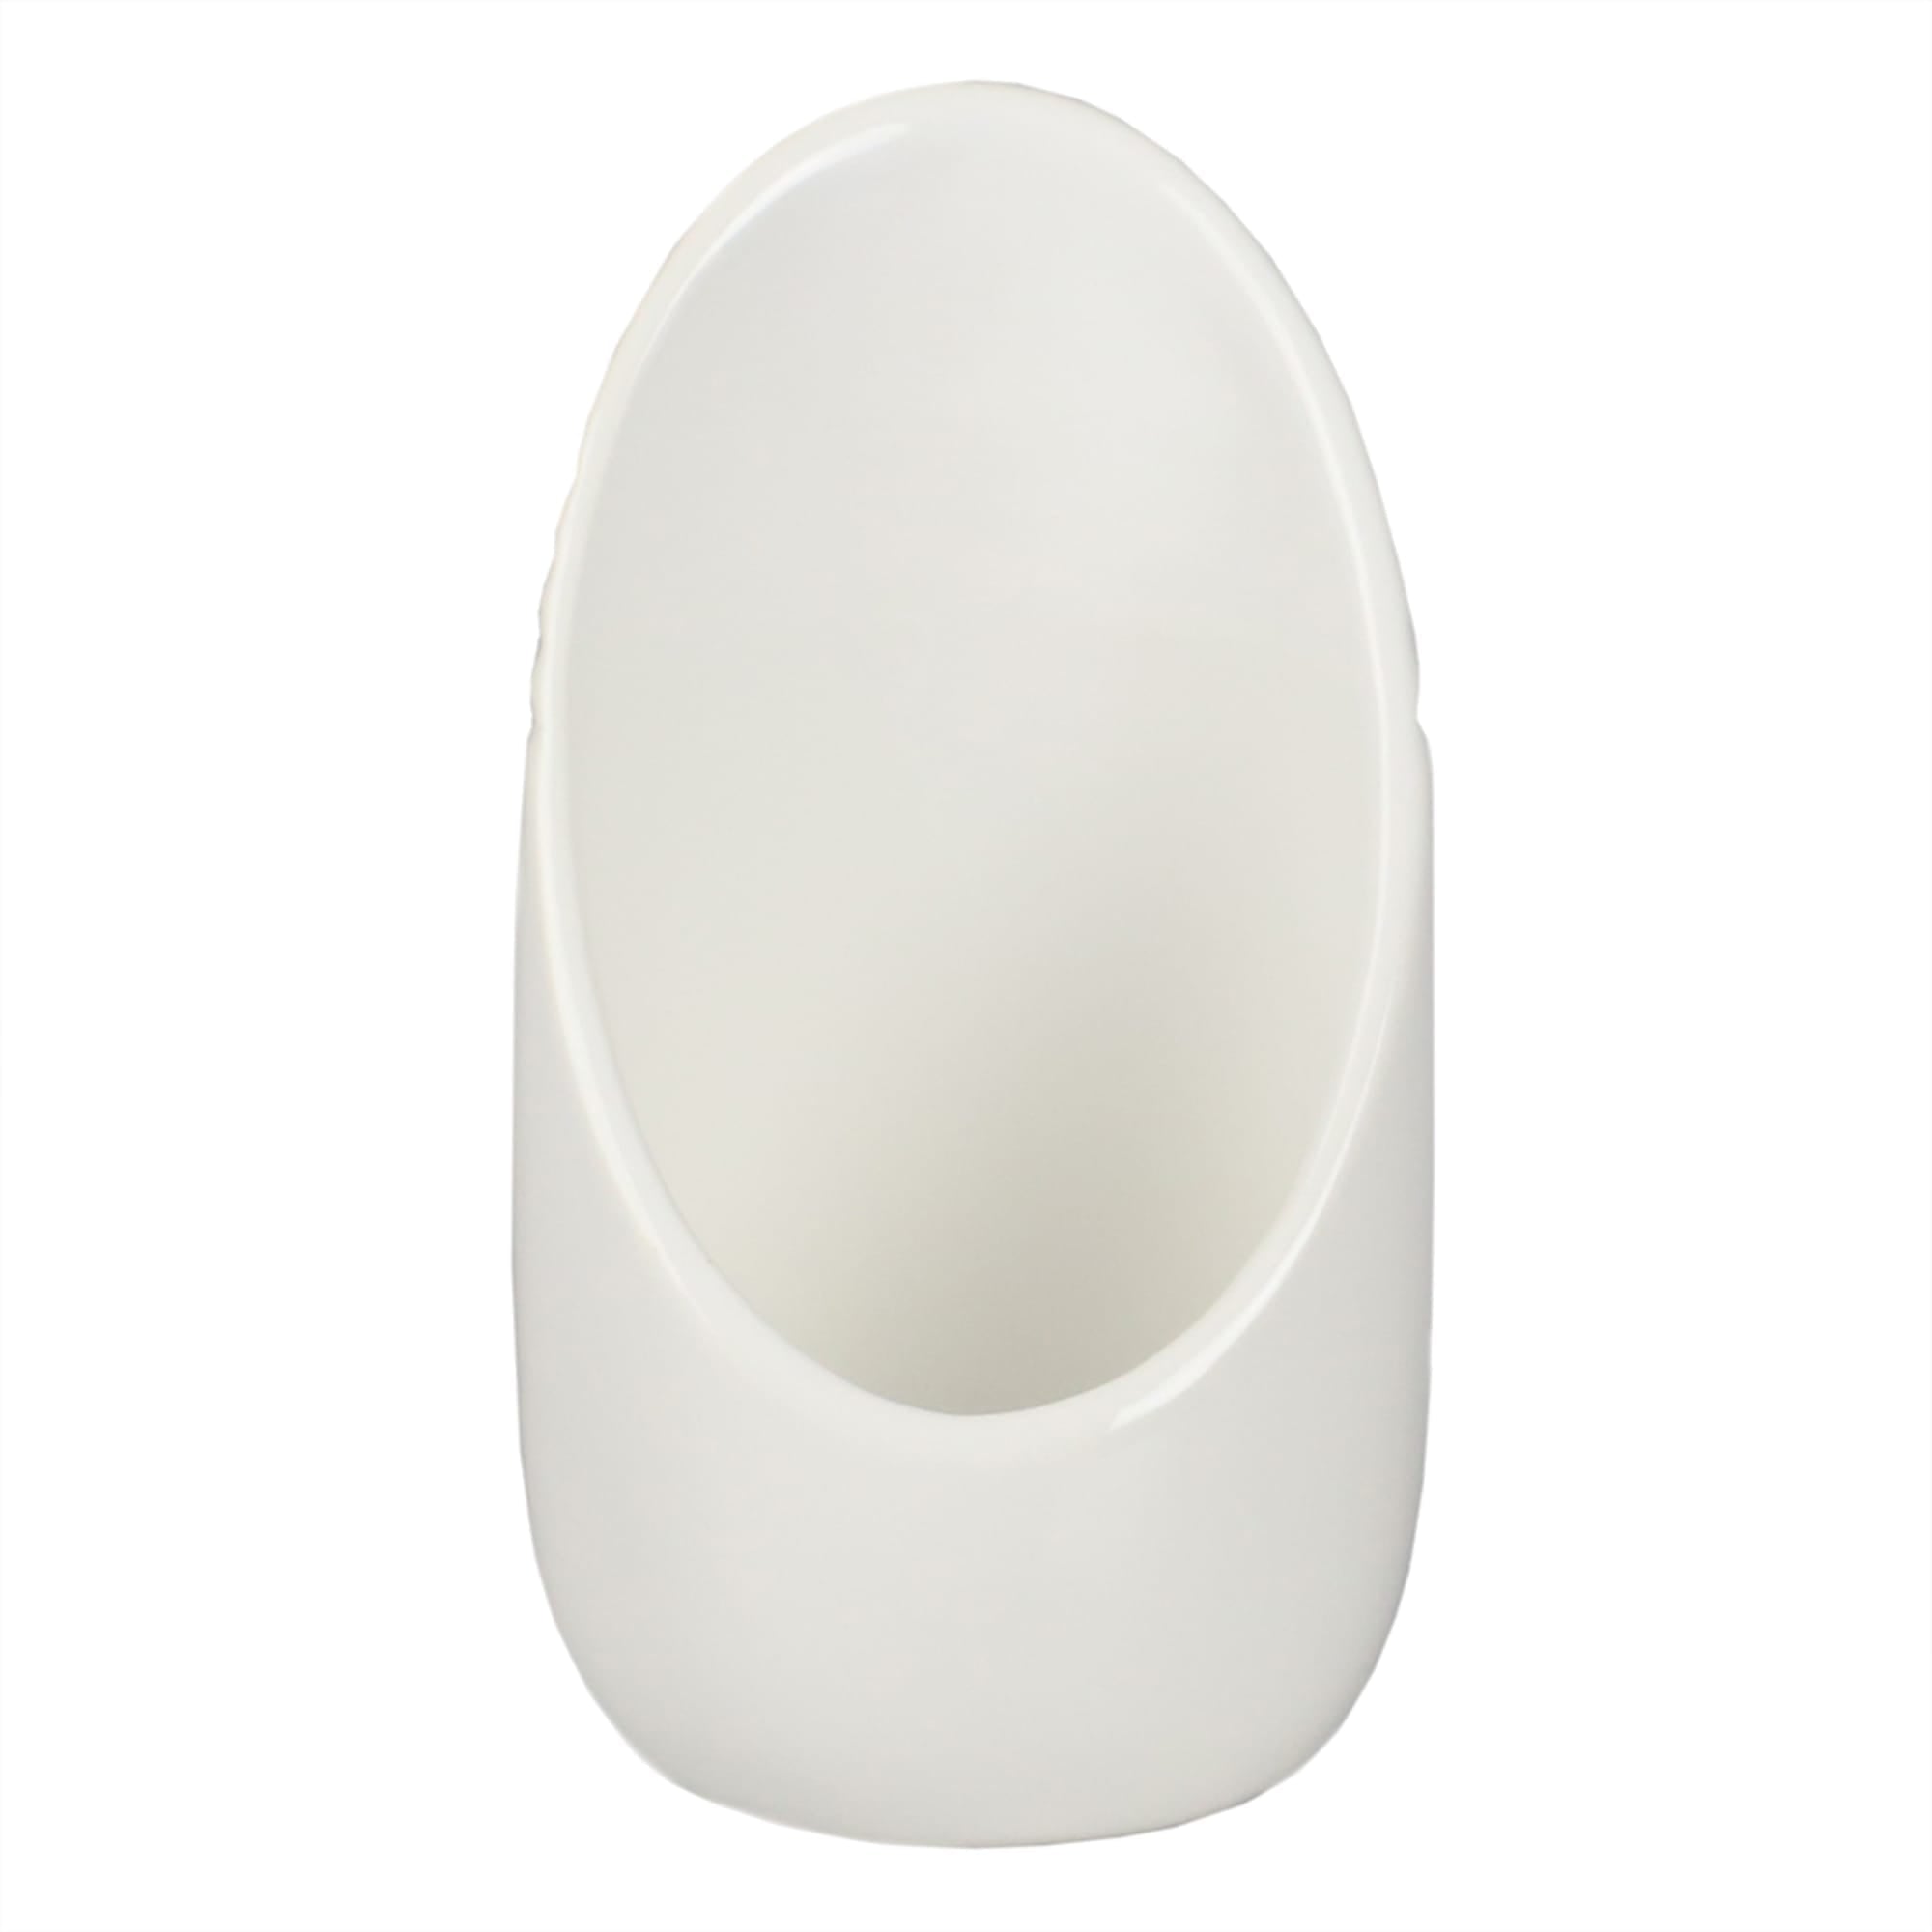 Home Basics Stand Up Ceramic Spoon Rest, White $4 EACH, CASE PACK OF 12